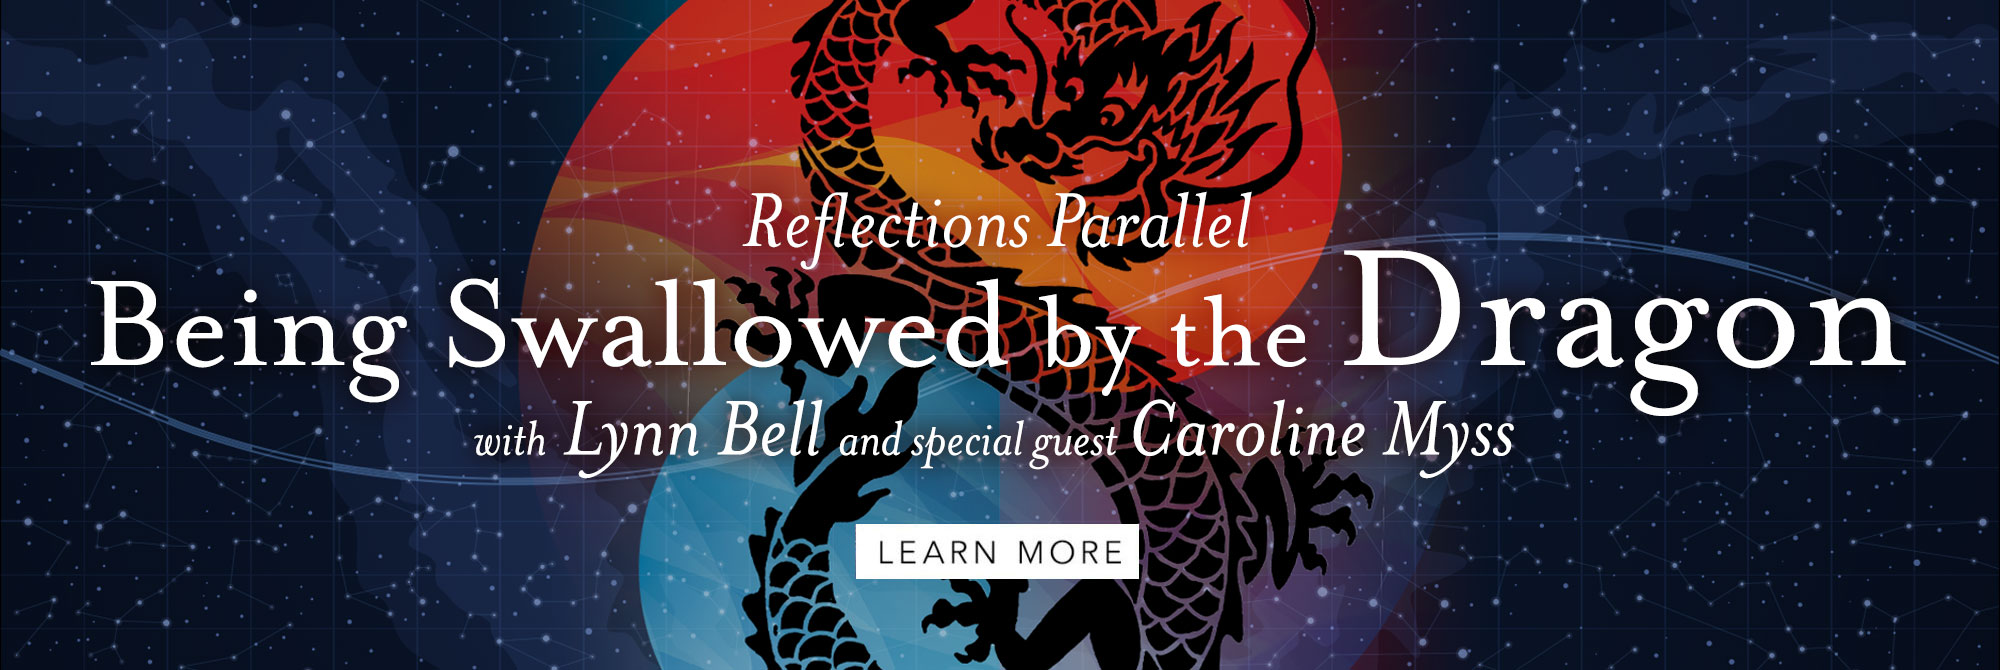 Reflections Parallel: Being Swallowed by the Dragon. Featuring Lynn Bell with Special Guest Caroline Myss